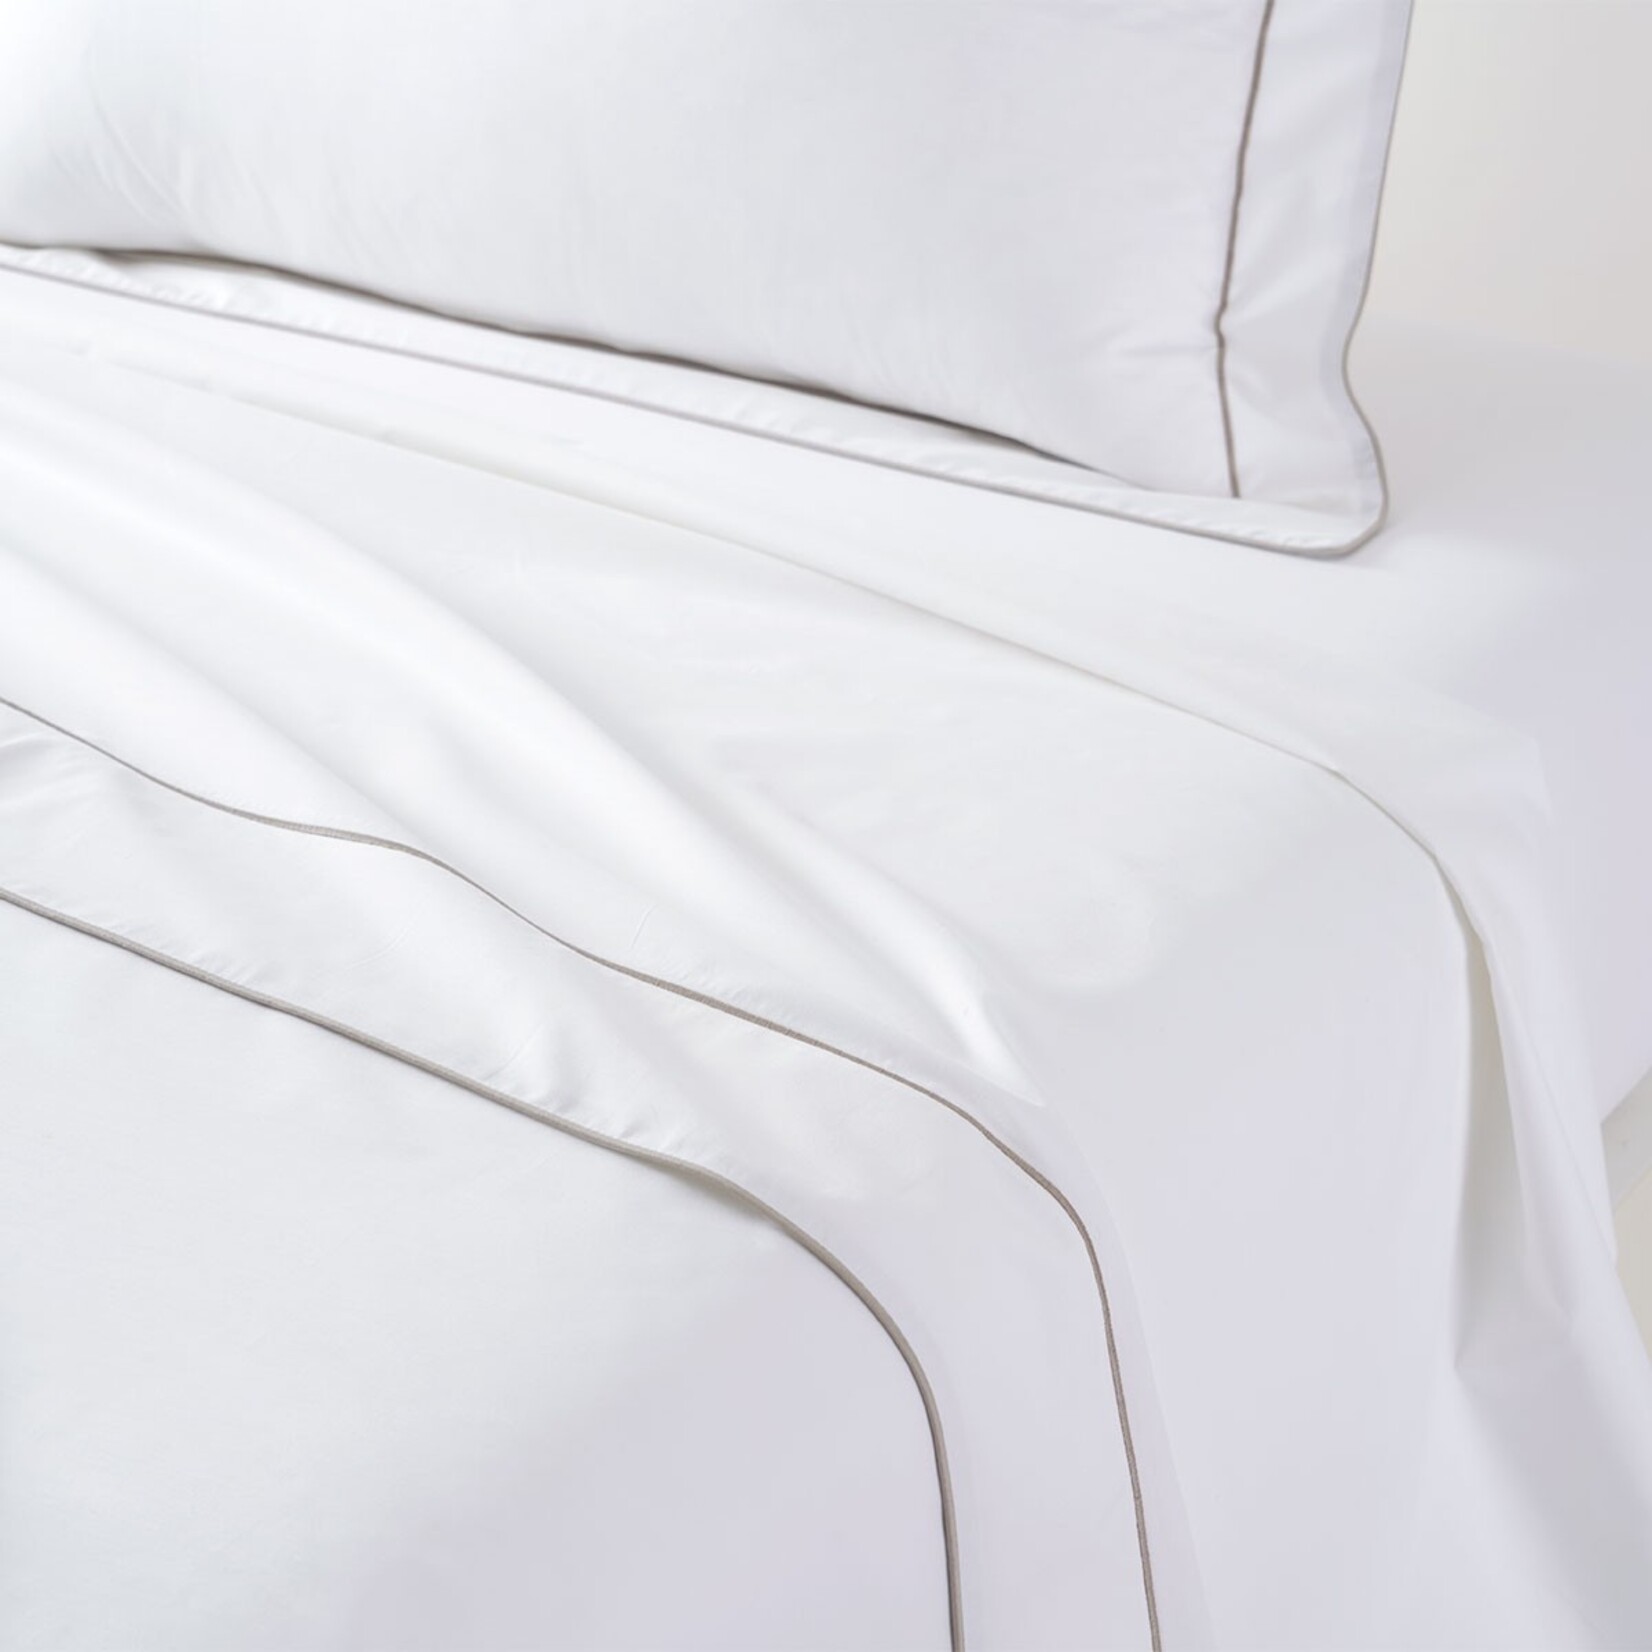 FLANDRE (Embroidered/Piped Cotton Percale 200t/c) Flat Sheet